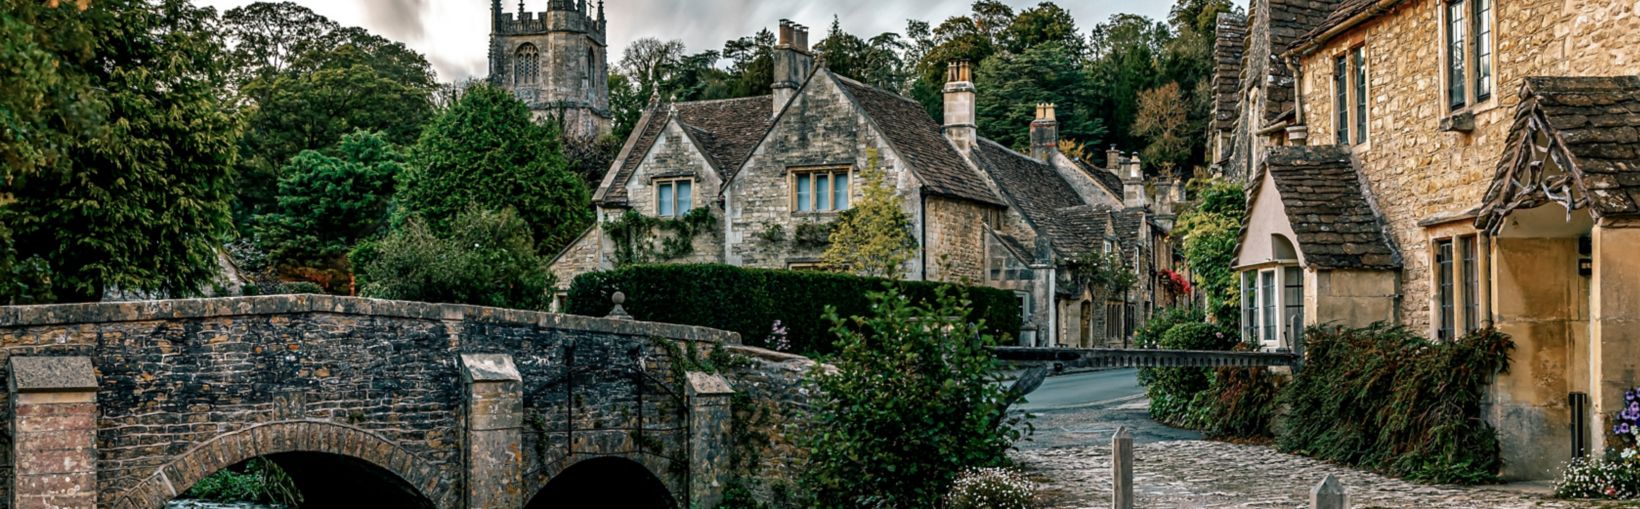 View of quaint Castle Combe village in England